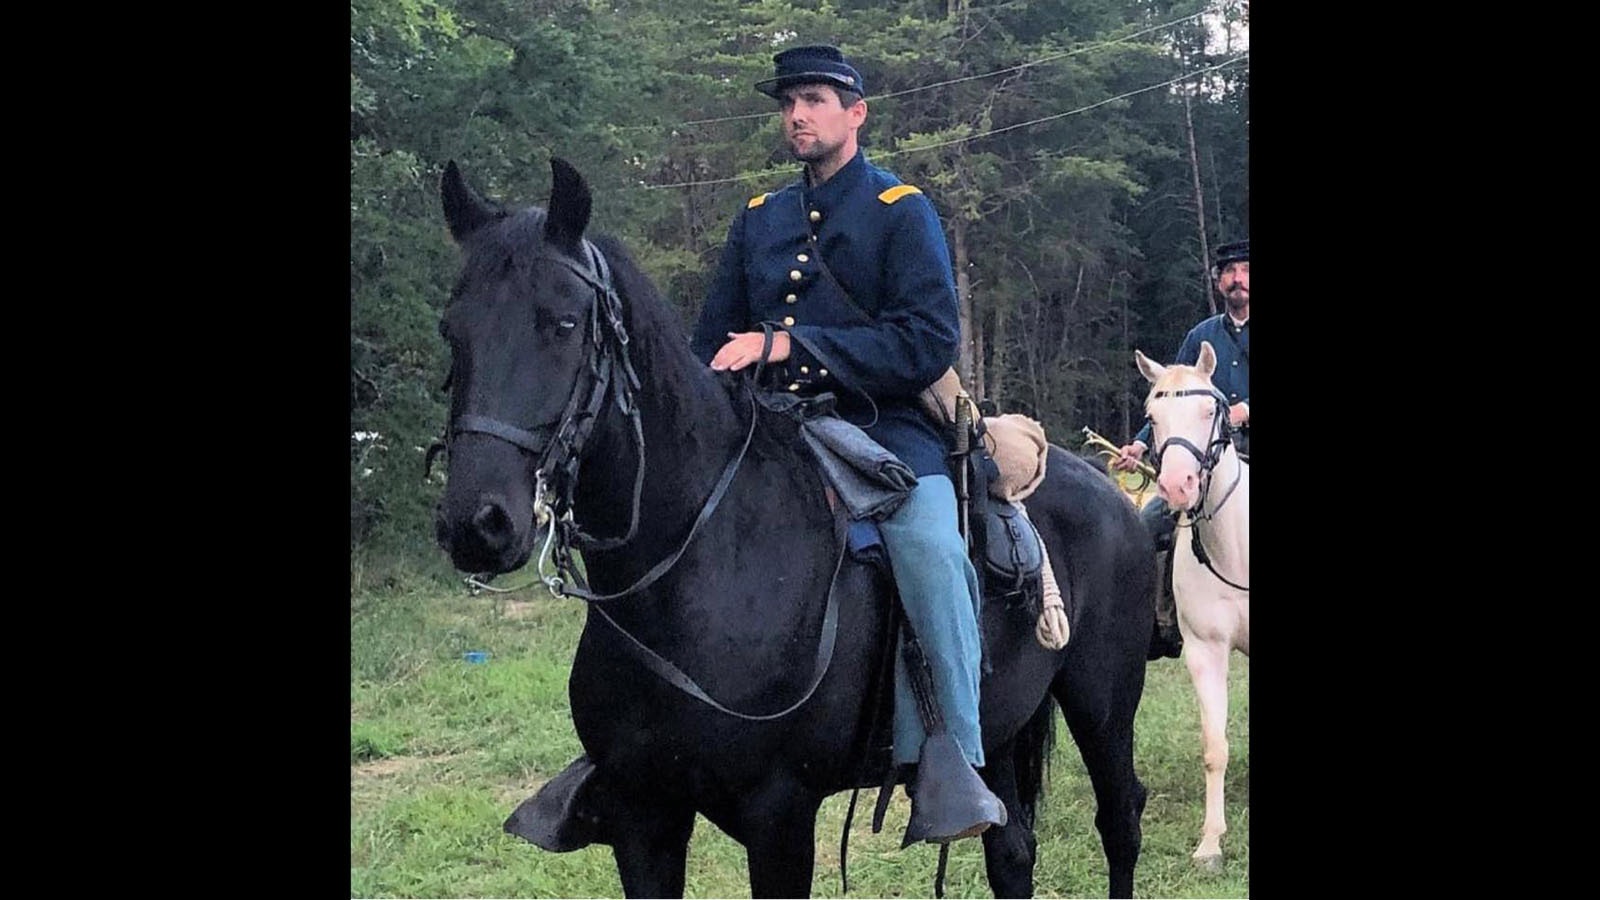 Casper’s Steven Dacus not only likes to research history, but also to live history through his role as a Civil War union cavalry officer.